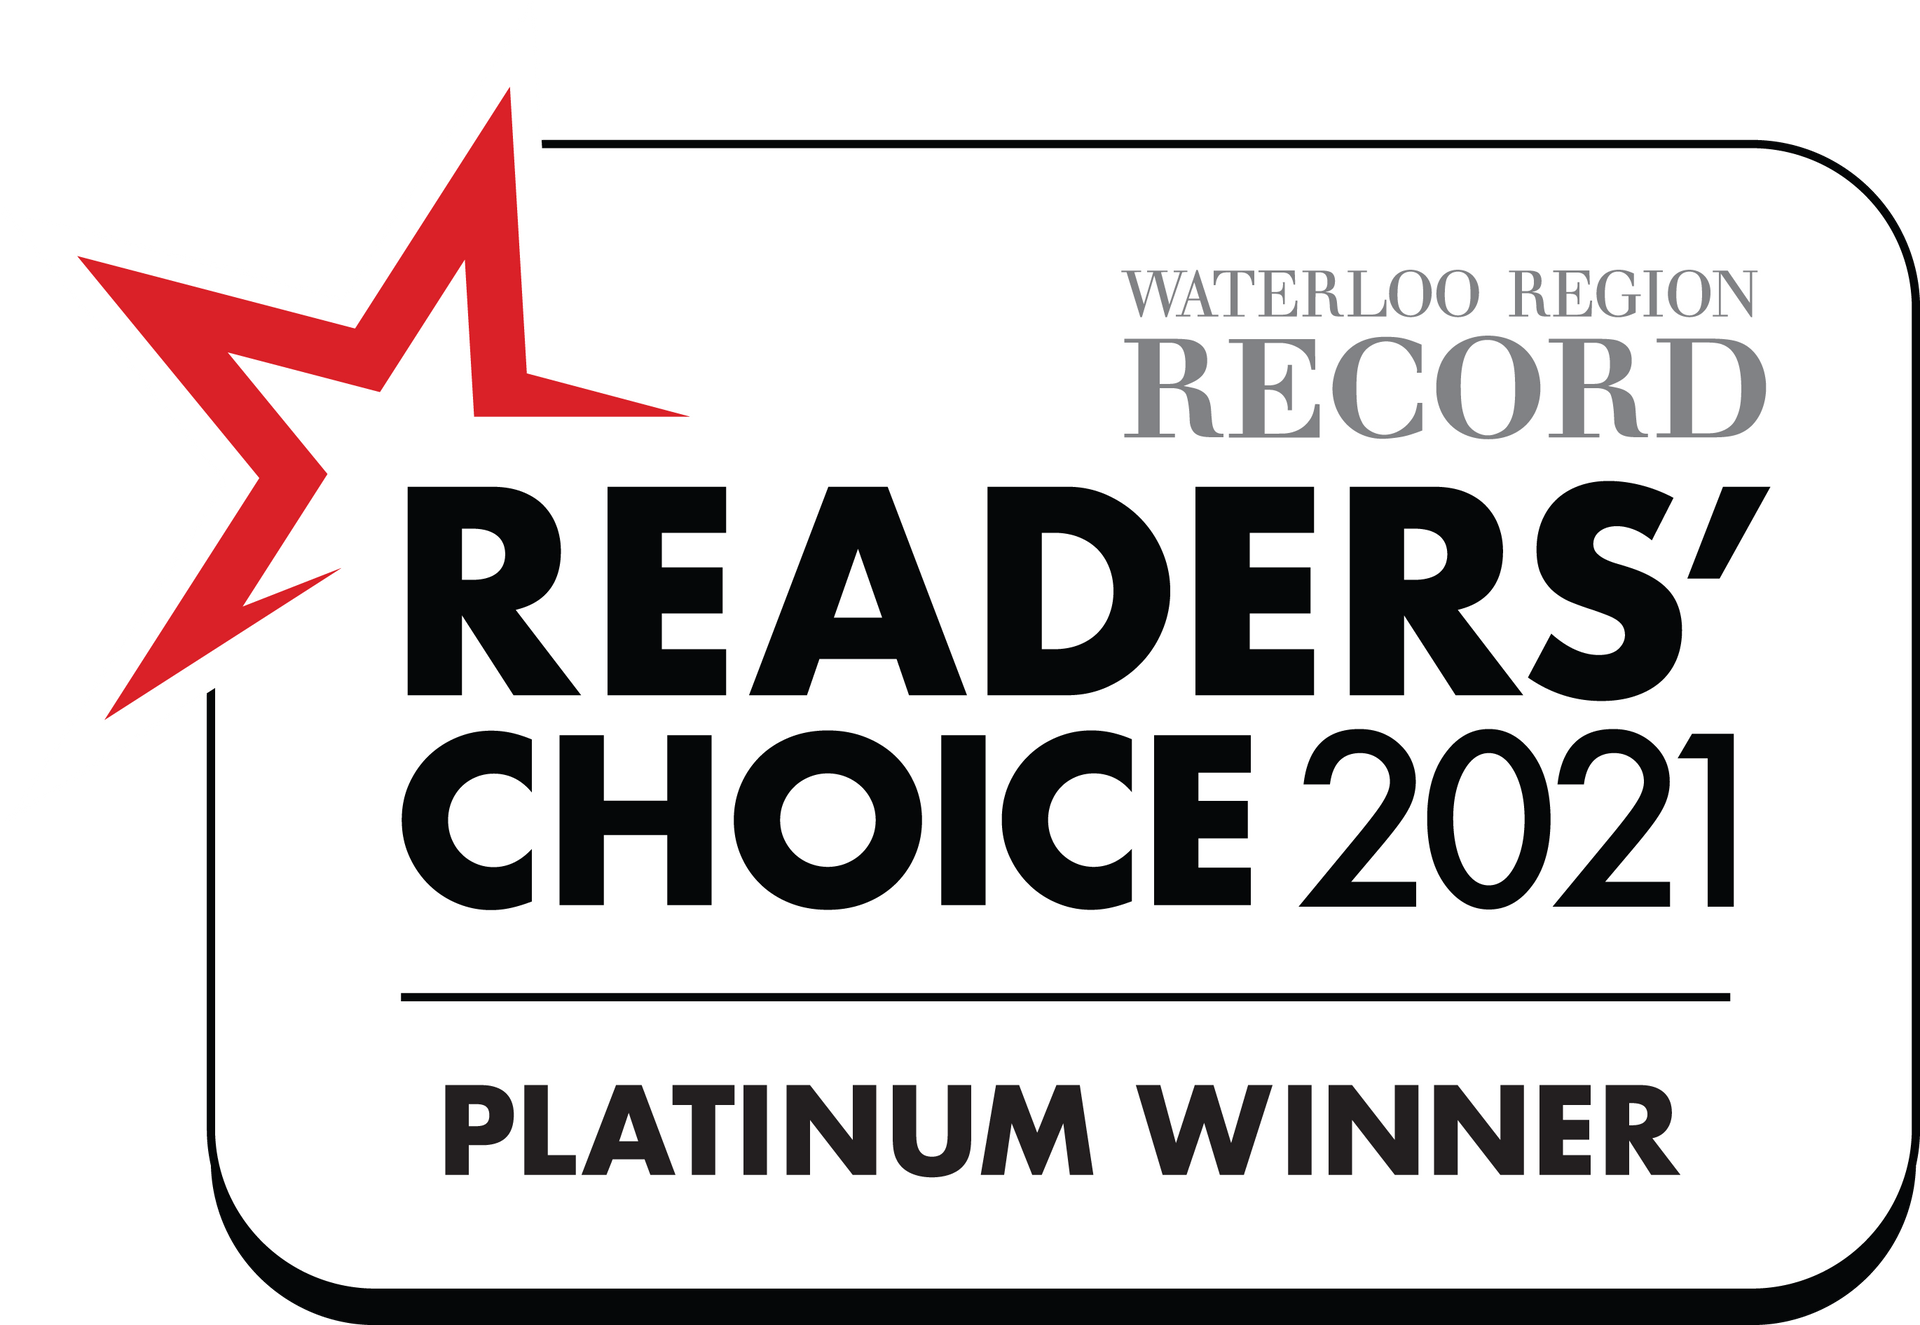 The logo for the waterloo region record readers ' choice 2021 platinum winner.